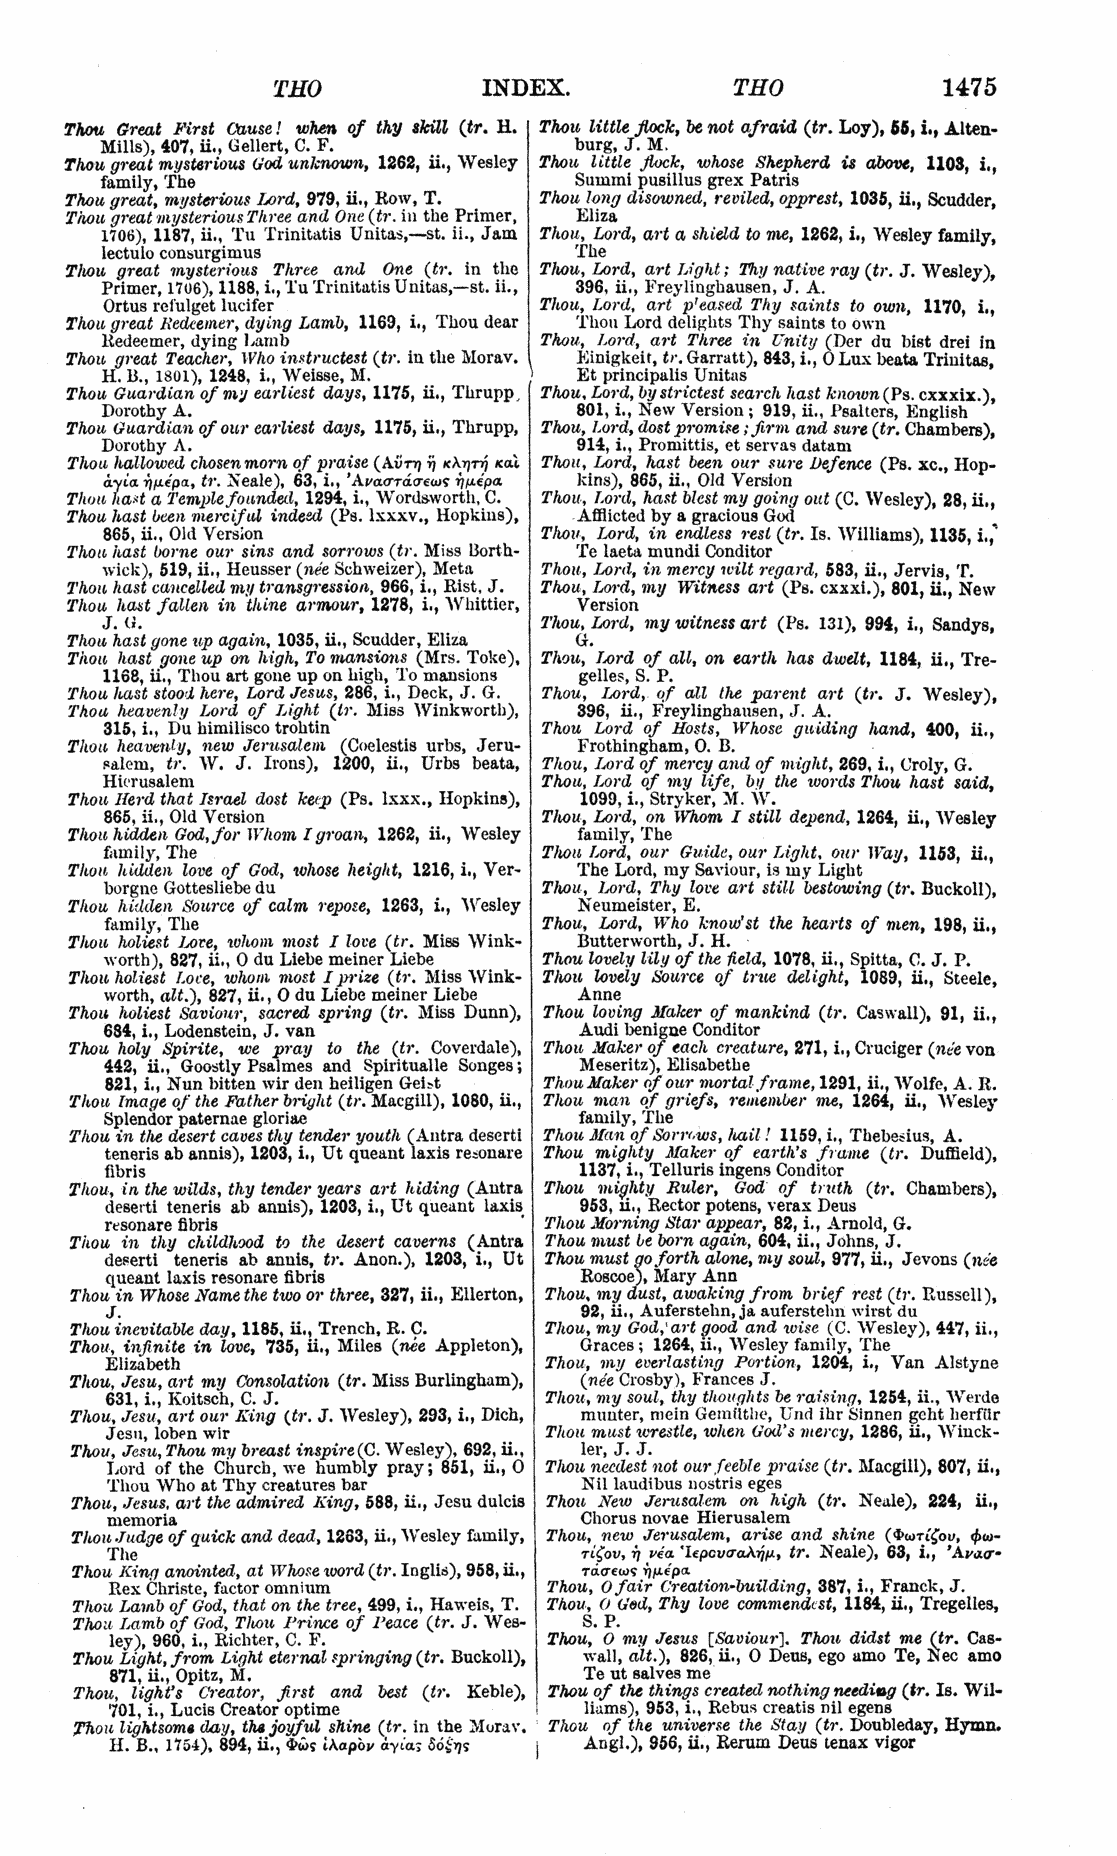 Image of page 1475